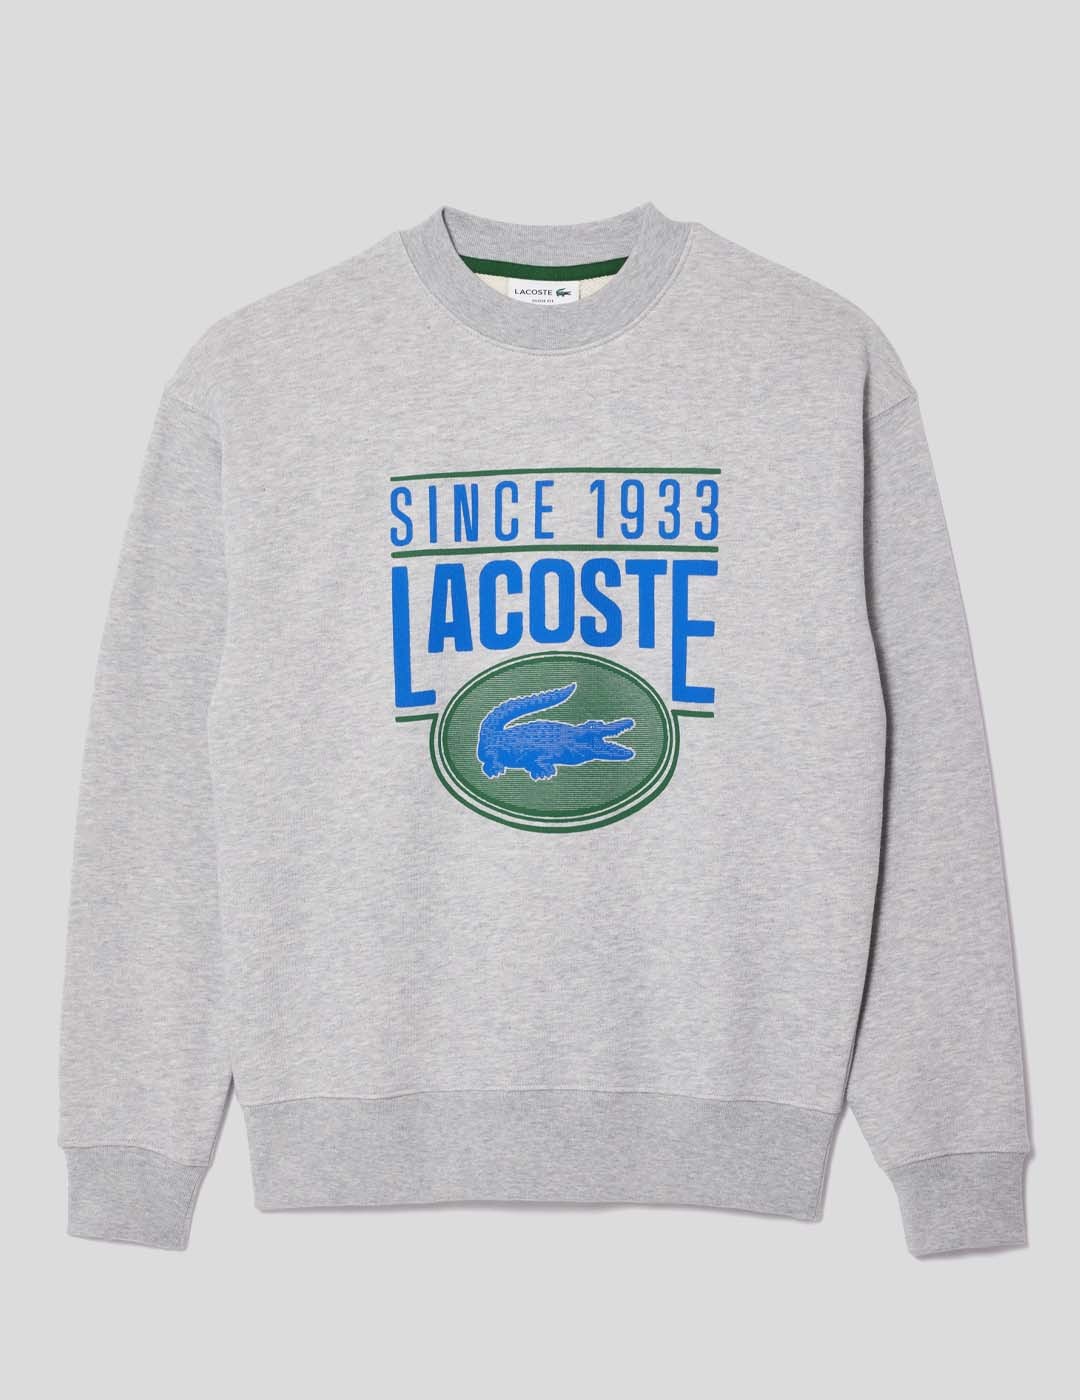 SUDADERA LACOSTE LOOSE FIT GRAPHIC SWEATSHIRT  ARGENT CHINE